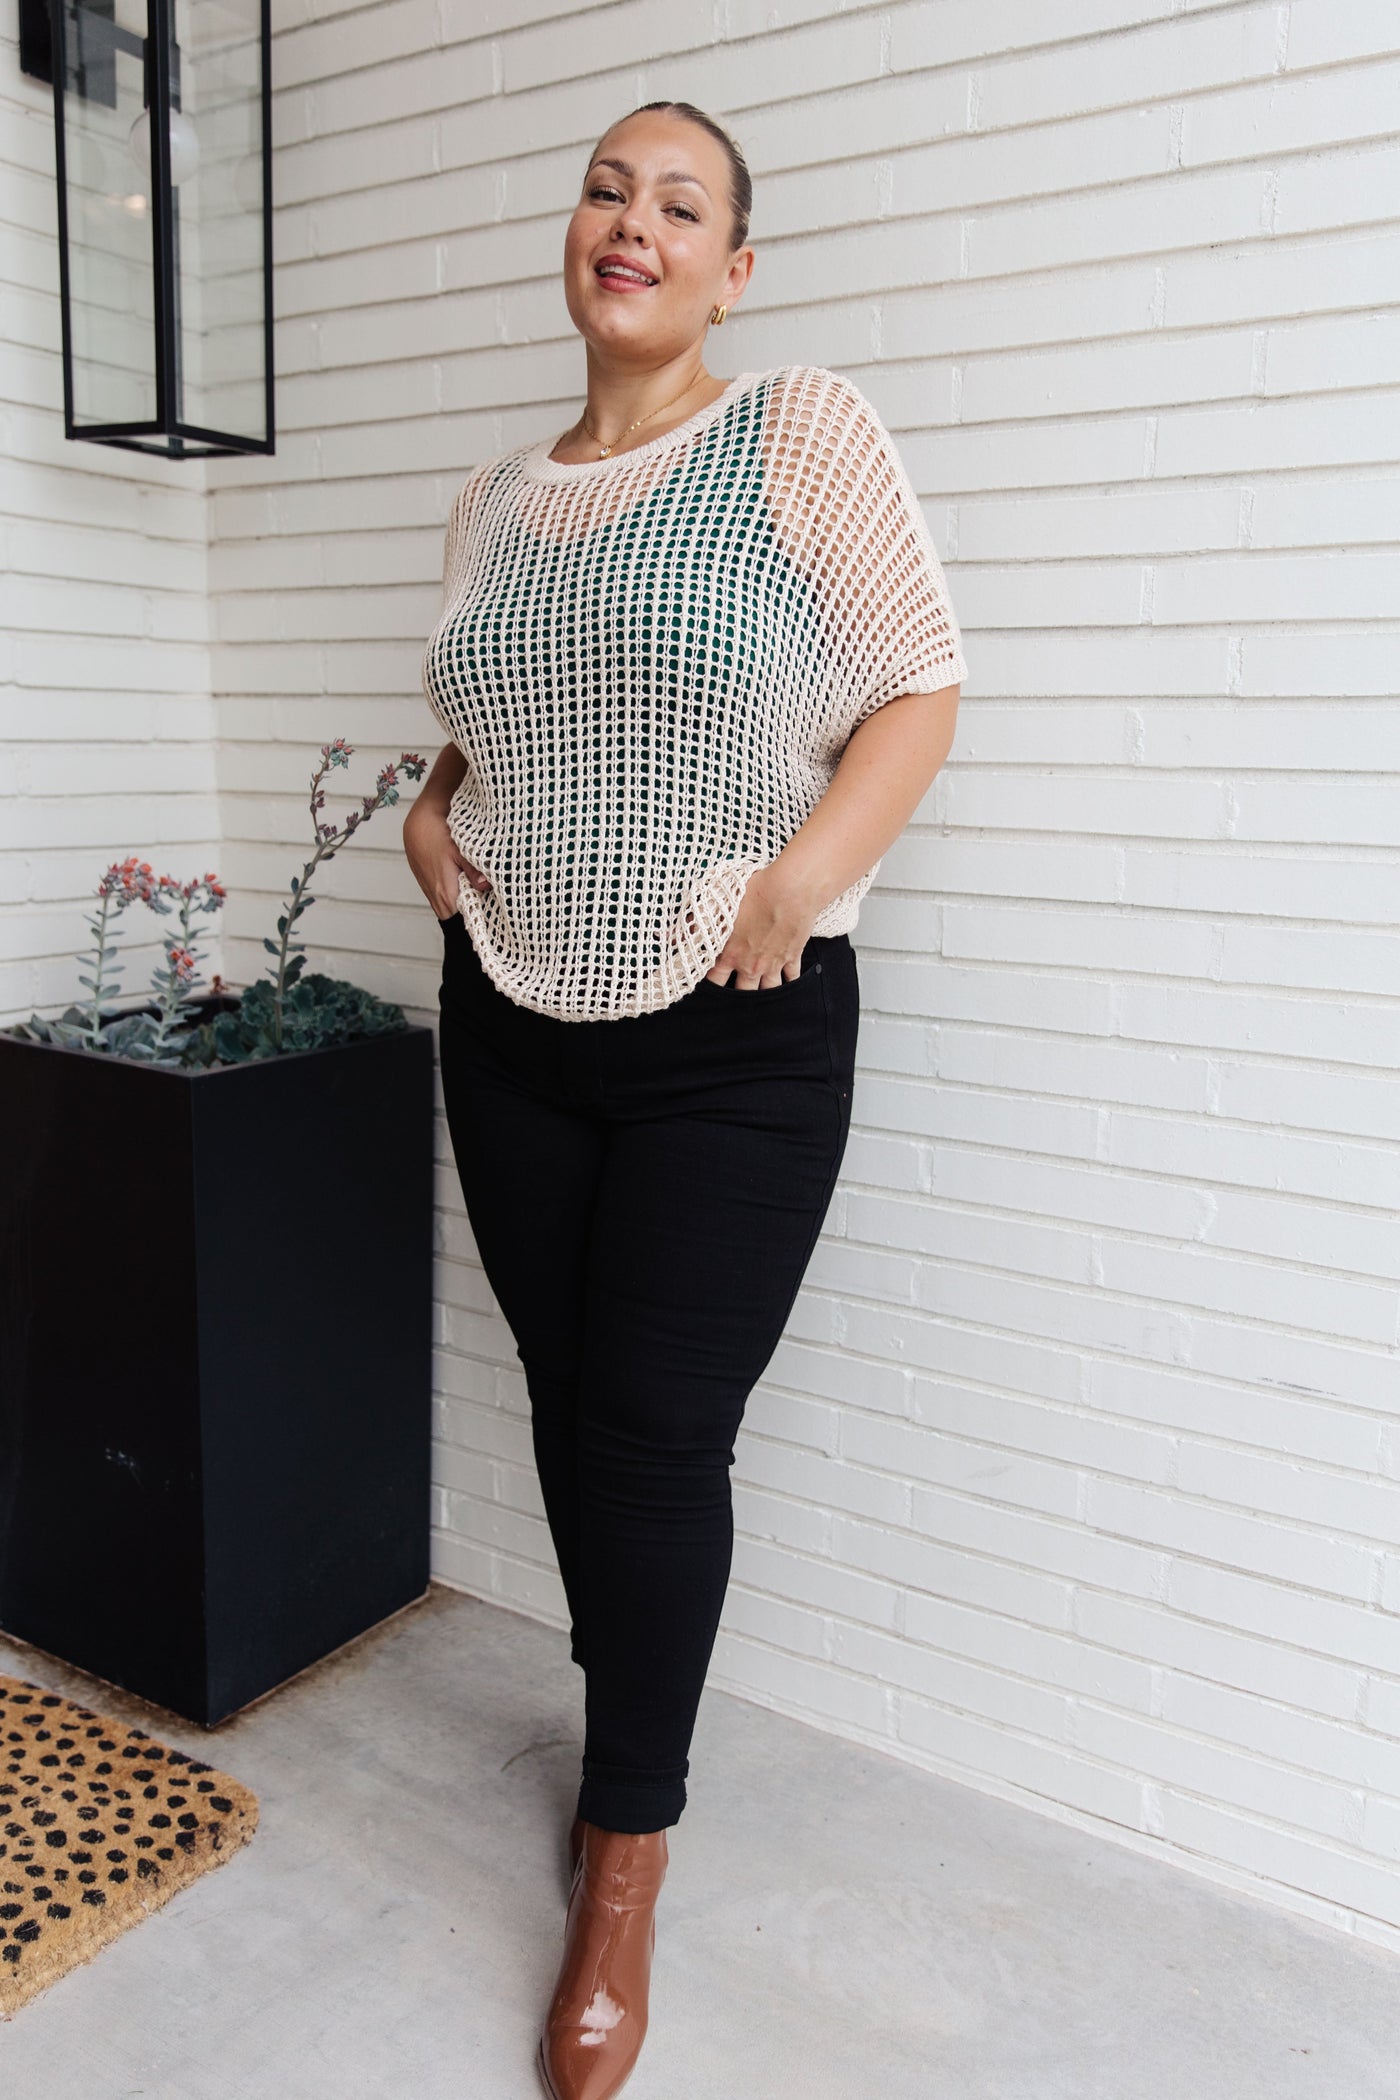 Coastal Dreams Fishnet Top in Cream-Tops-Ave Shops-Market Street Nest, Fashionable Clothing, Shoes and Home Décor Located in Mabank, TX